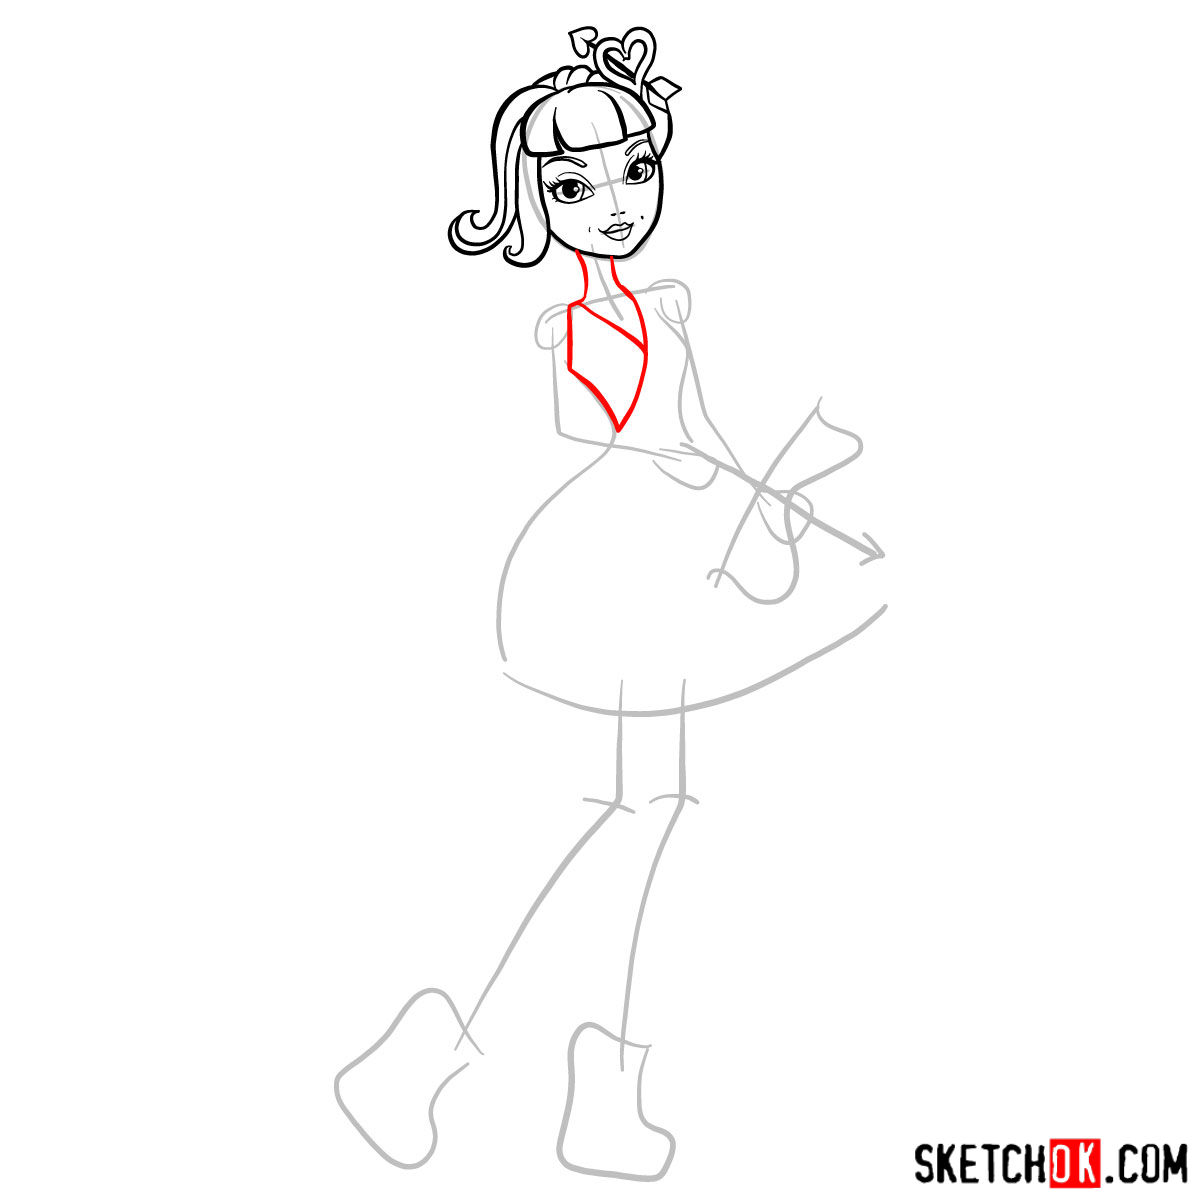 How to draw C.A. Cupid - step 04